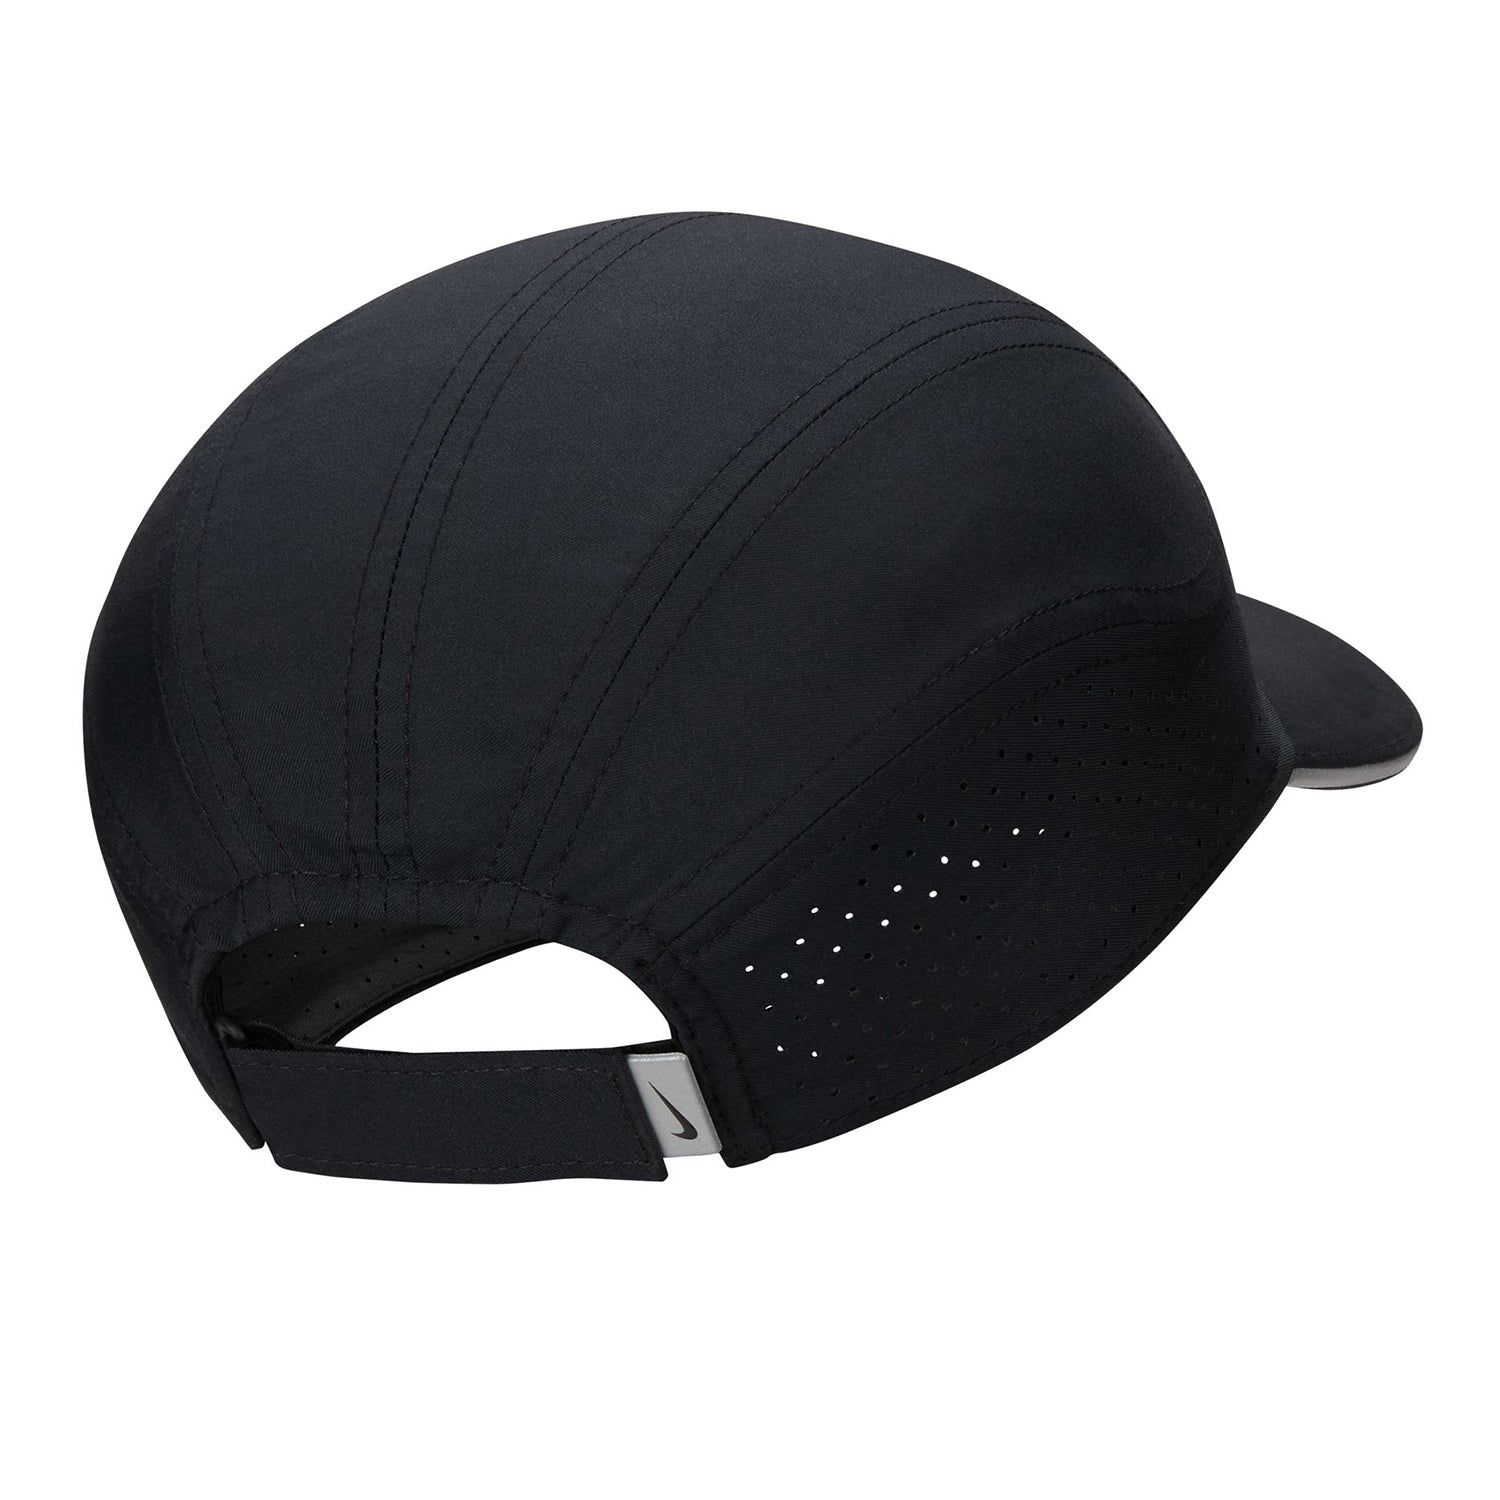 Dri-FIT ADV Fly Unstructured Reflective Cap